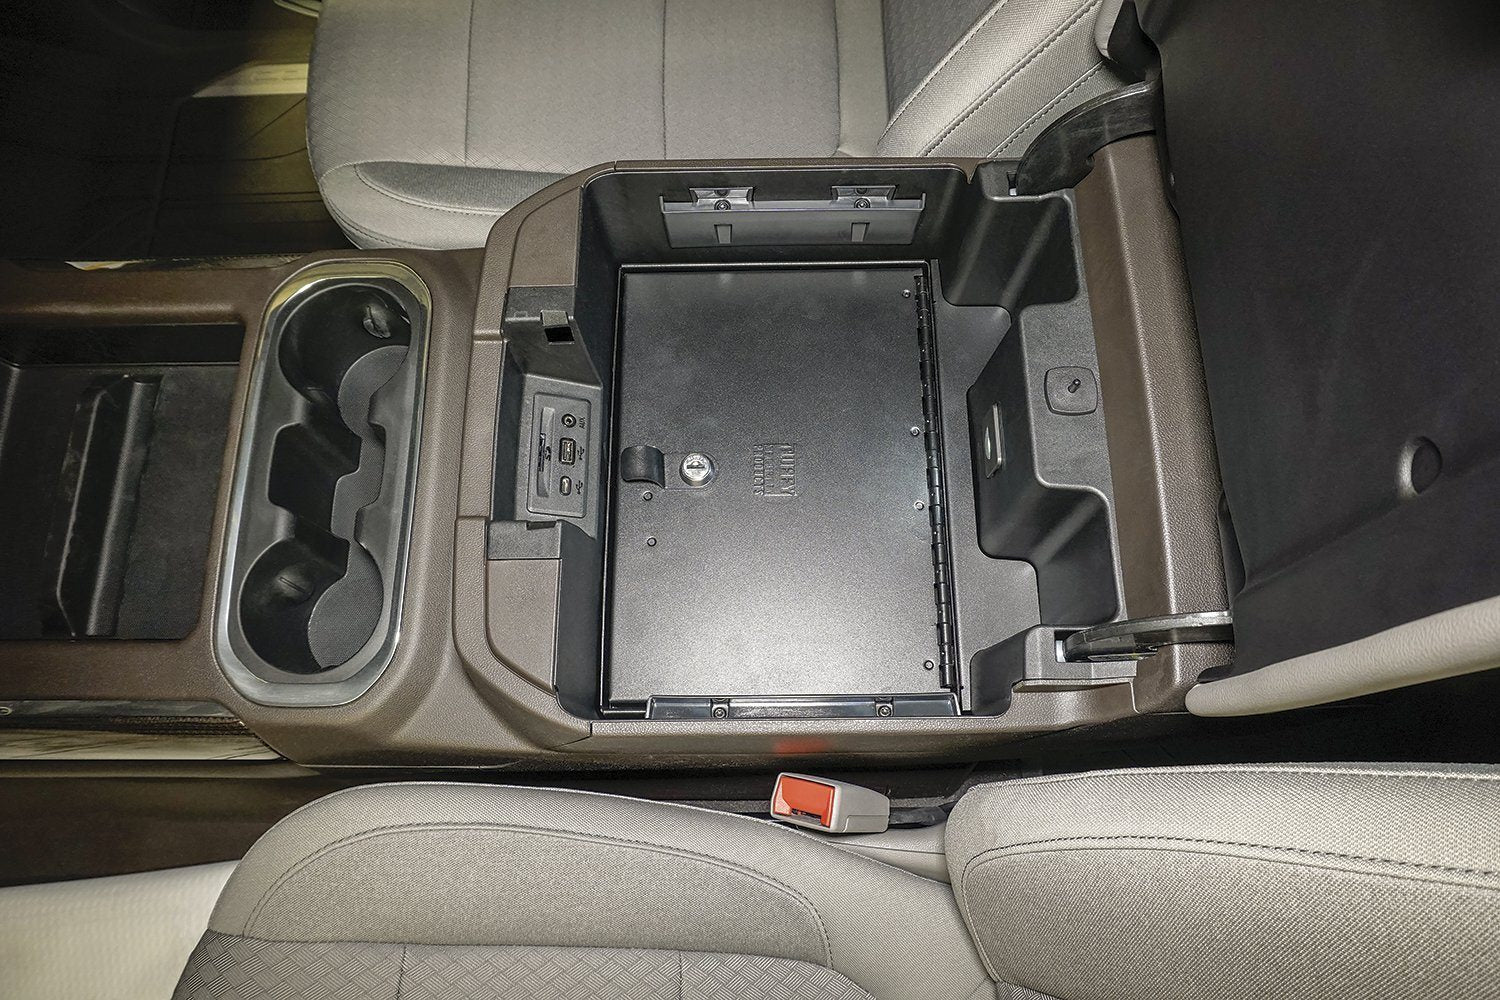 '19-22 Chevy/GMC 1500 Security Console Tuffy Security Products display